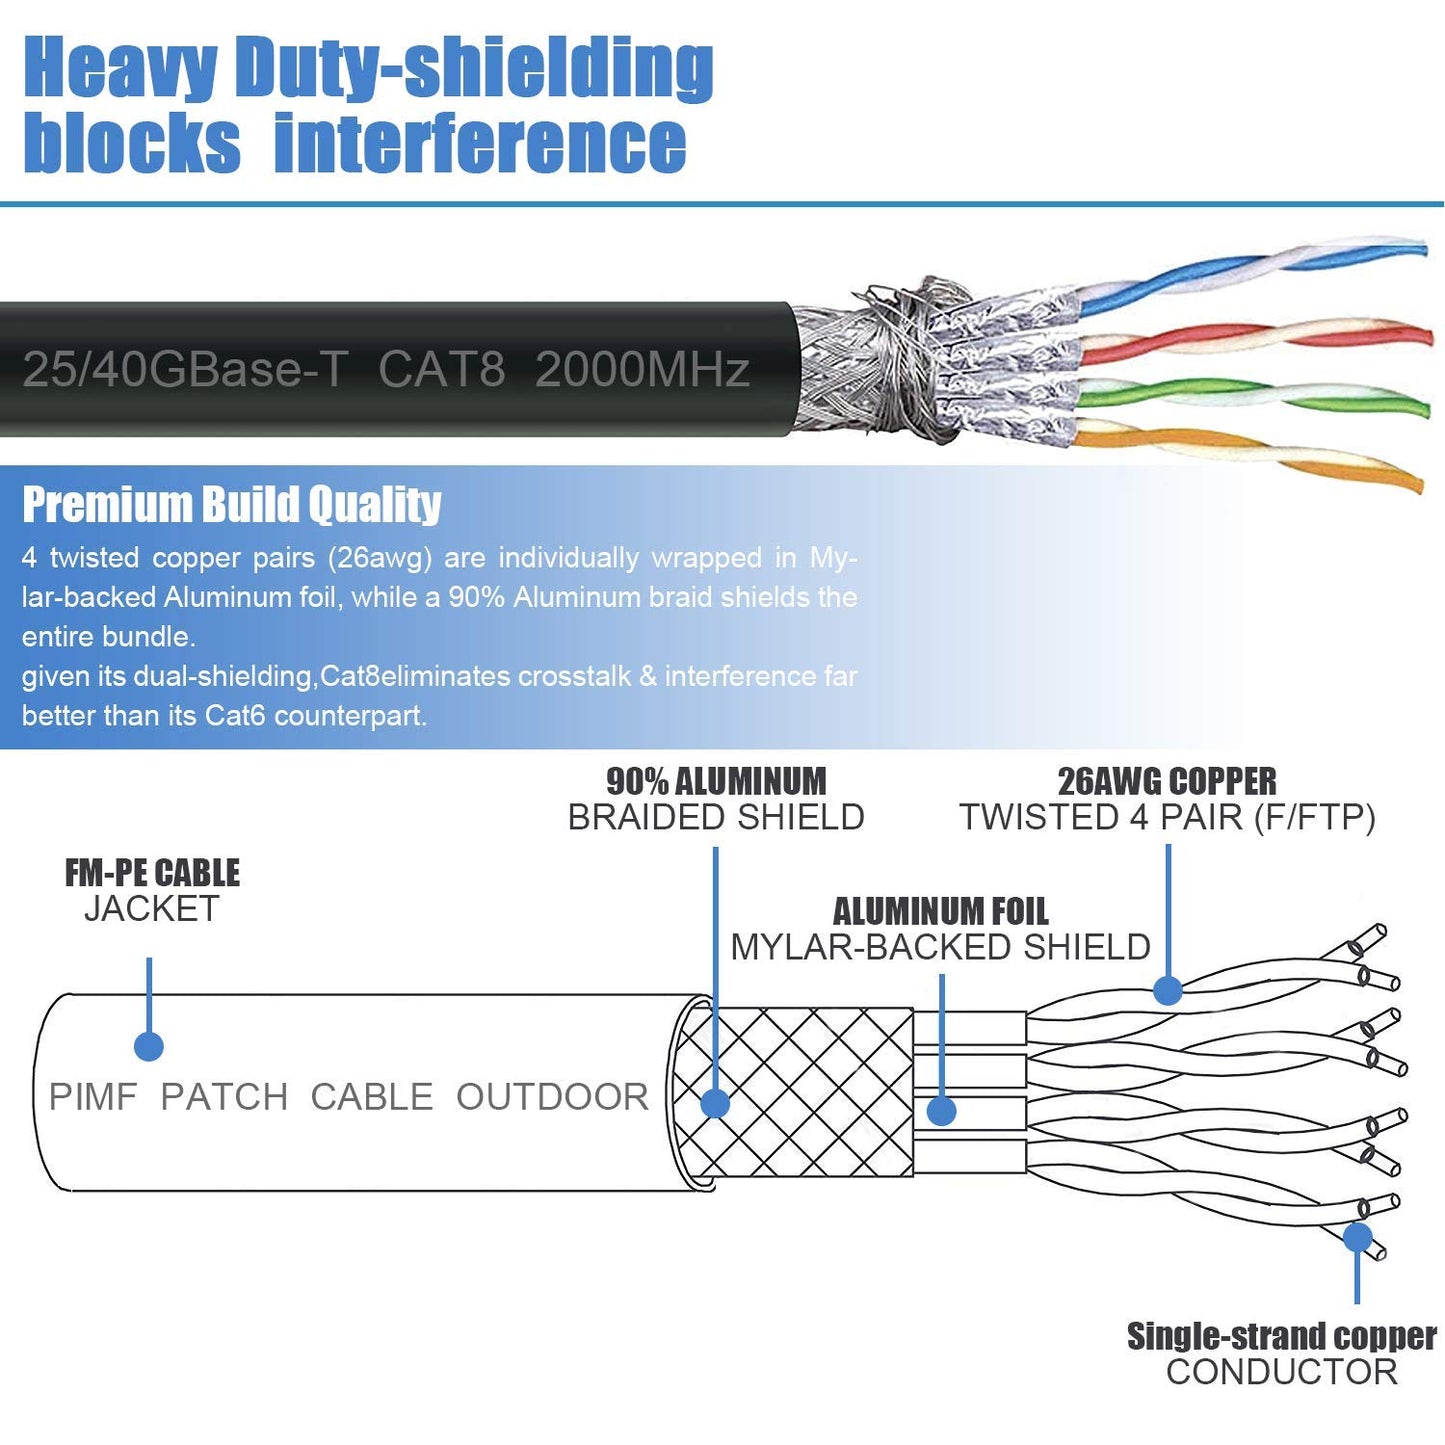 Langya Tech Certified Cat8 Ethernet Cable